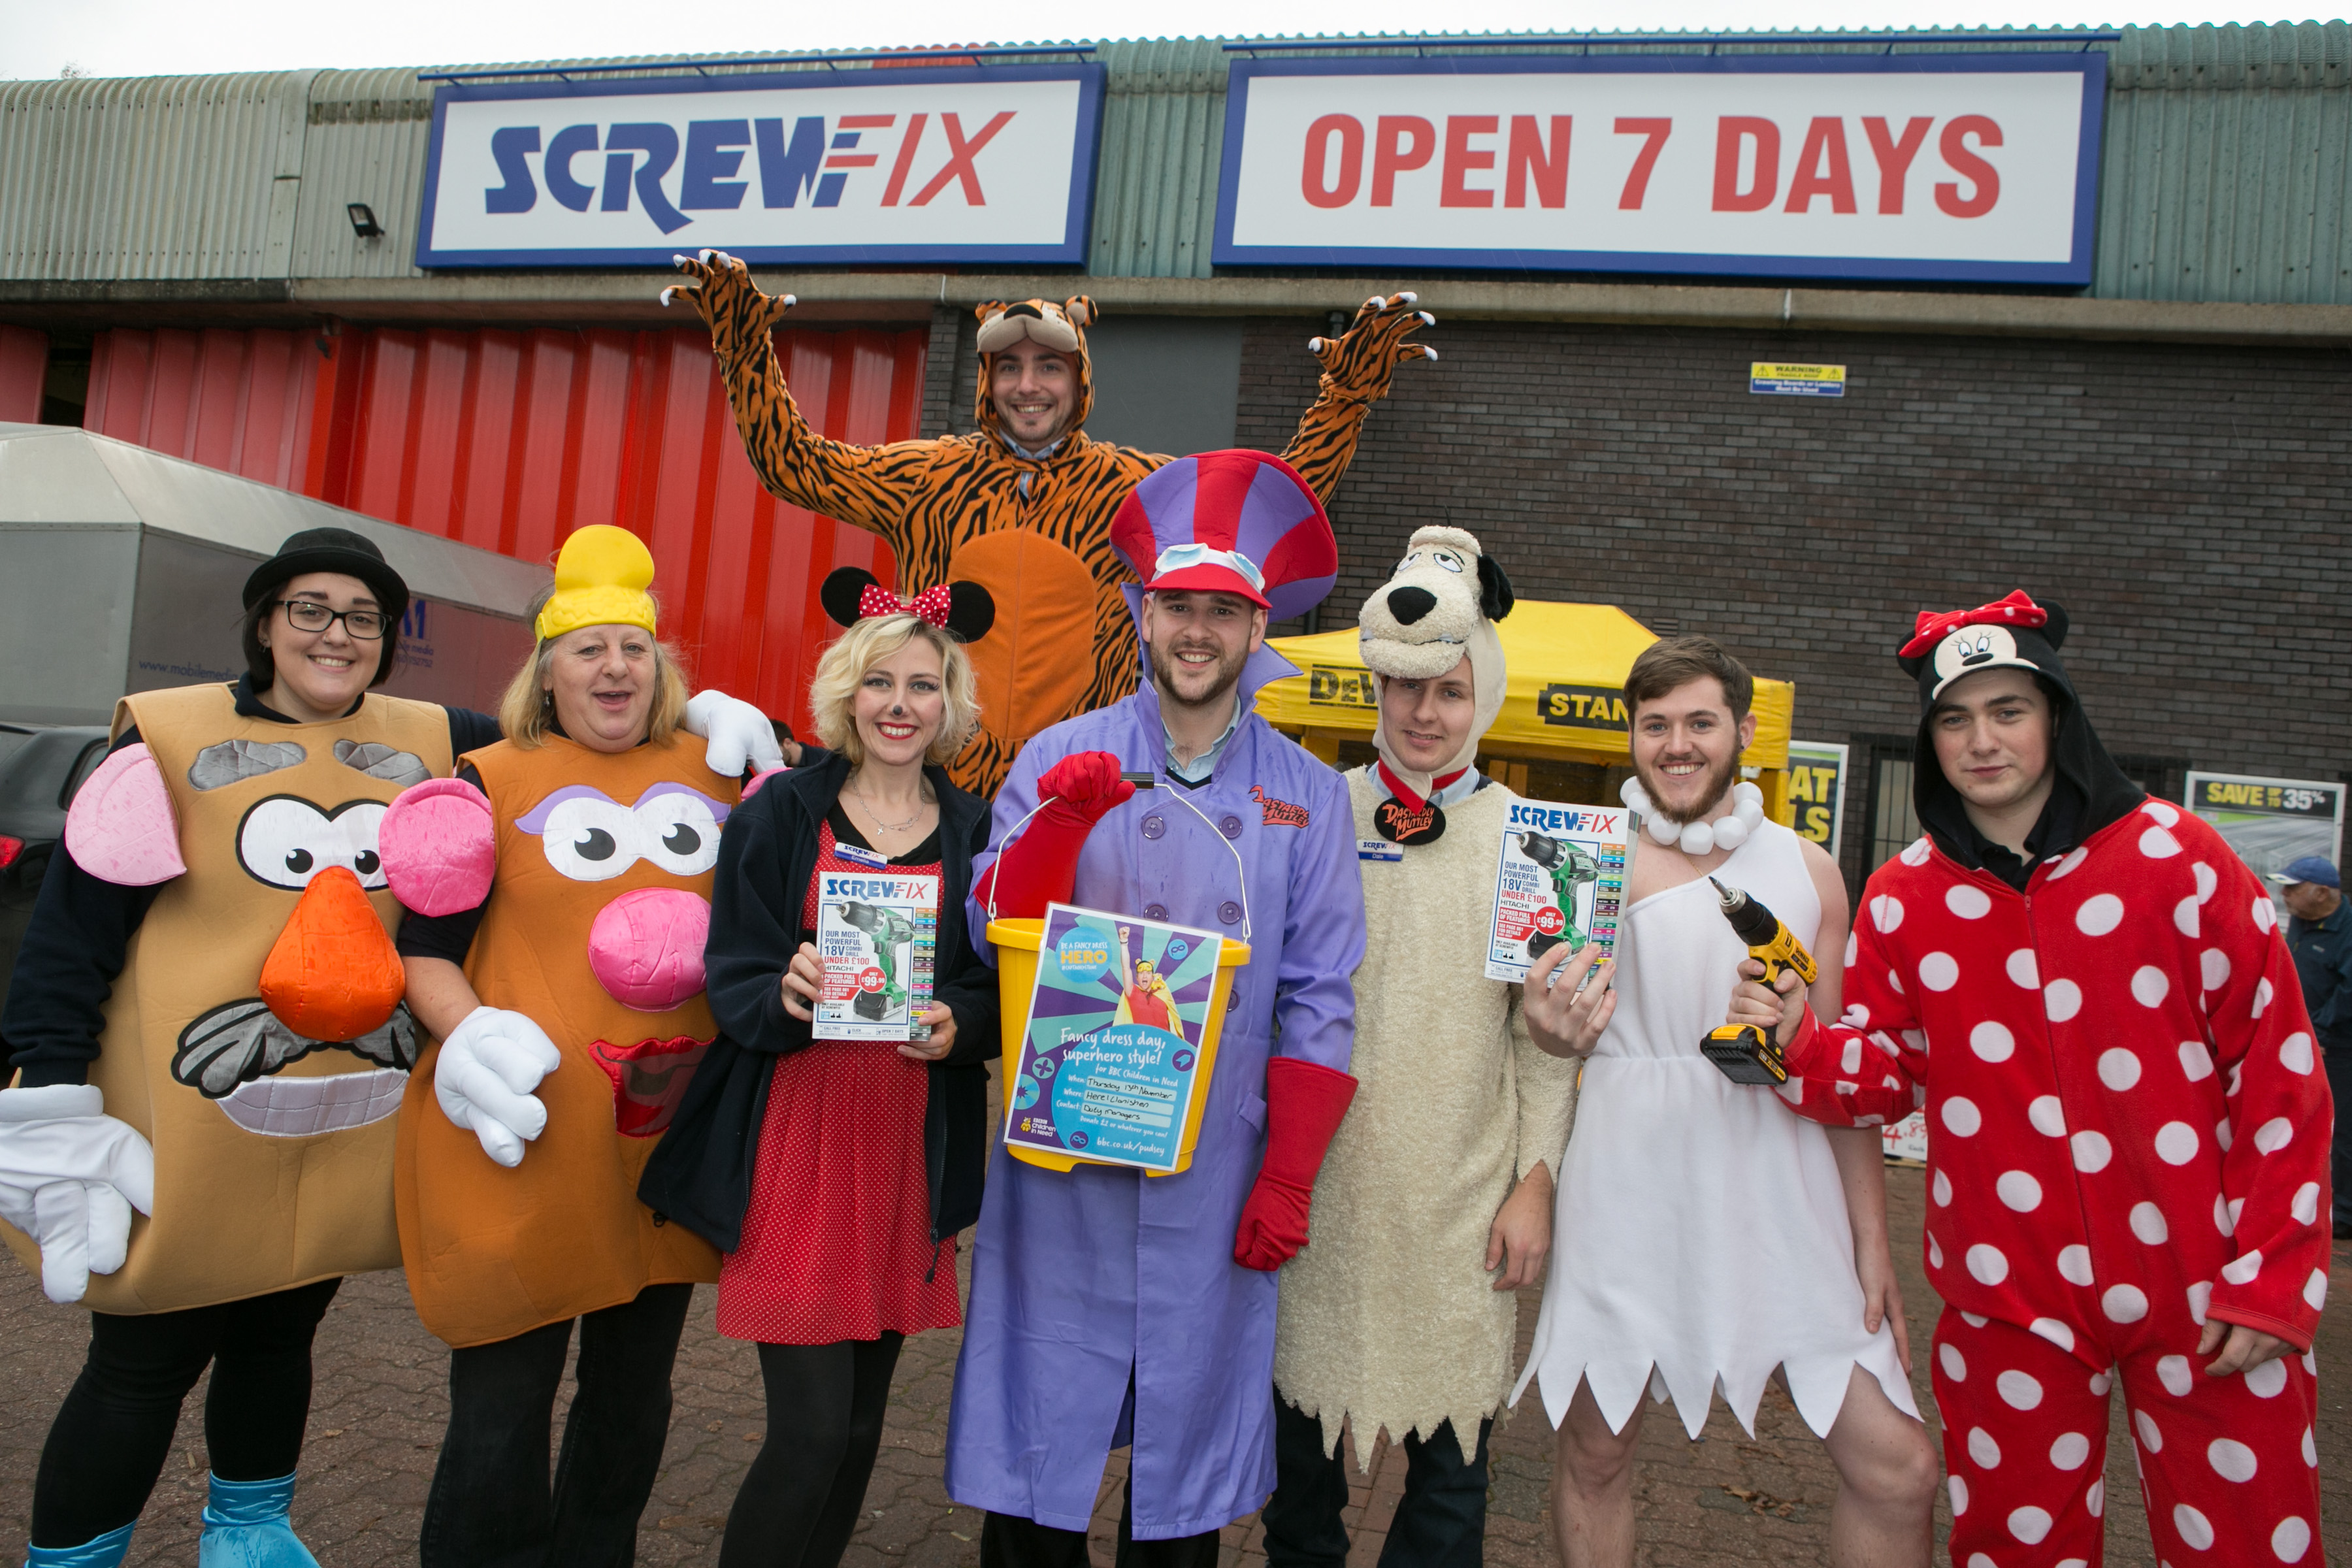 Cardiff’s third Screwfix store is declared a runaway success